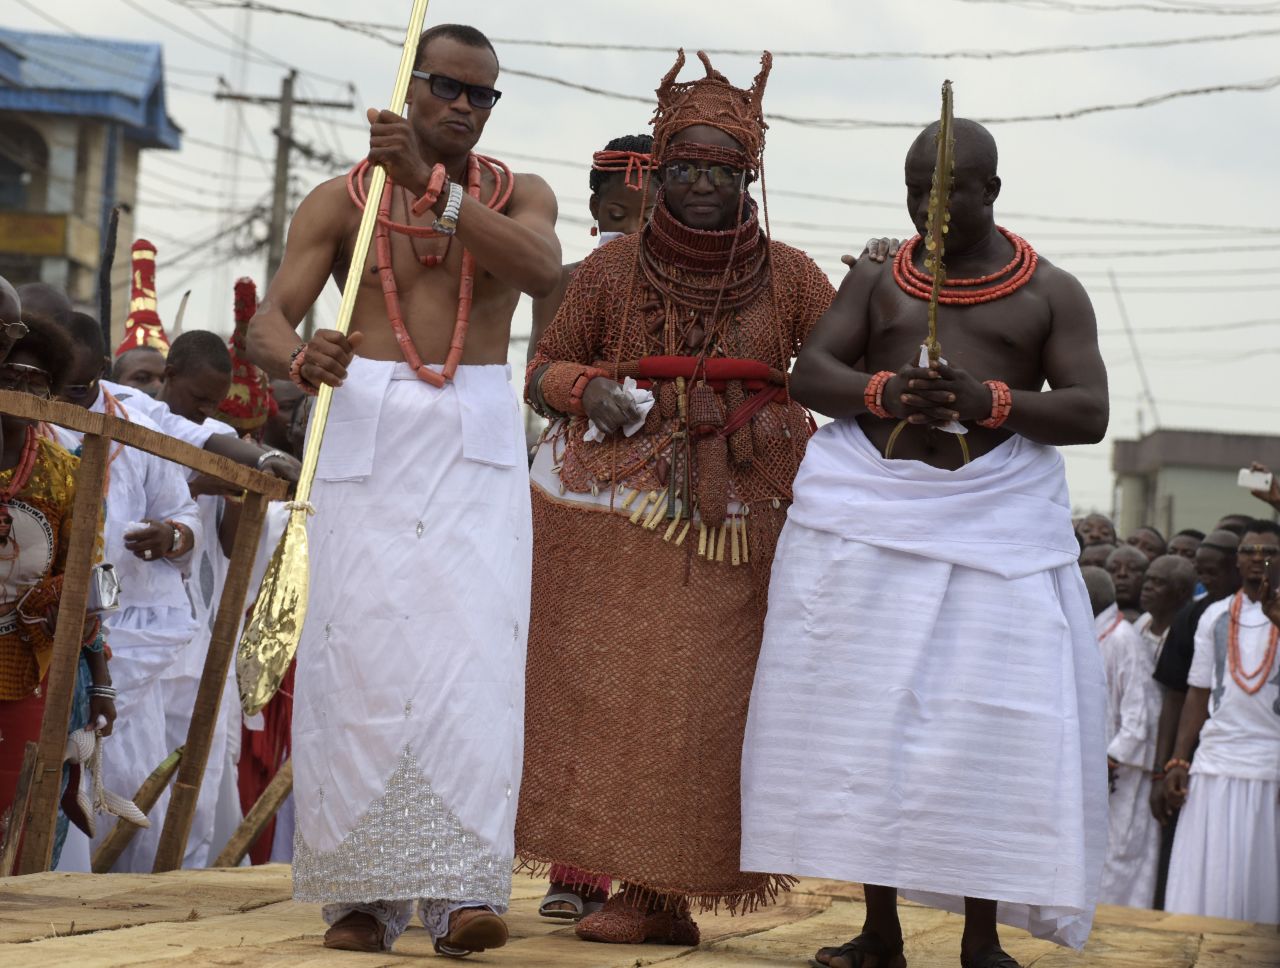 The coronation of a new Oba in the Benin Kingdom begins several months before the final coronation event takes place.